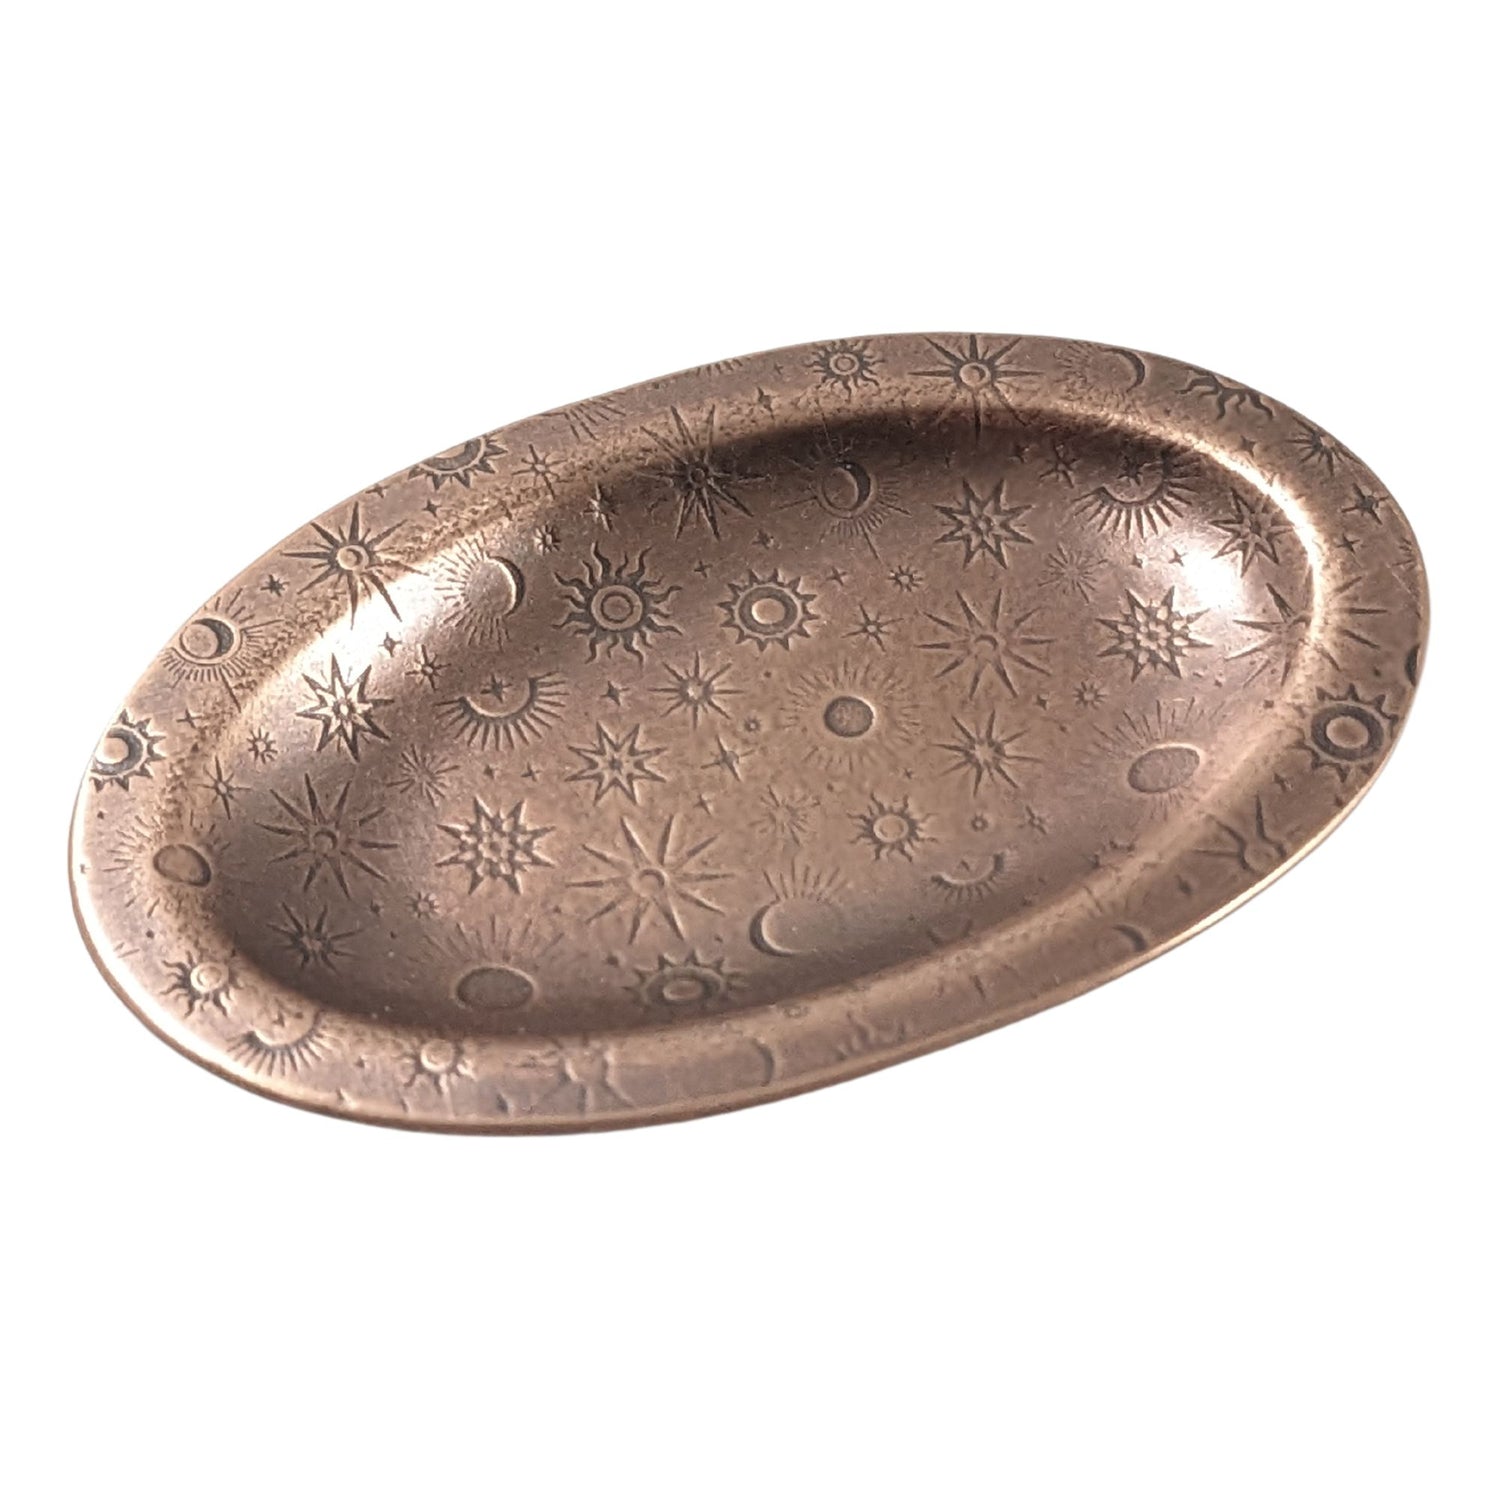 An oval copper ring dish with a raised edge. The dish has an impressed pattern of various star deisgns.